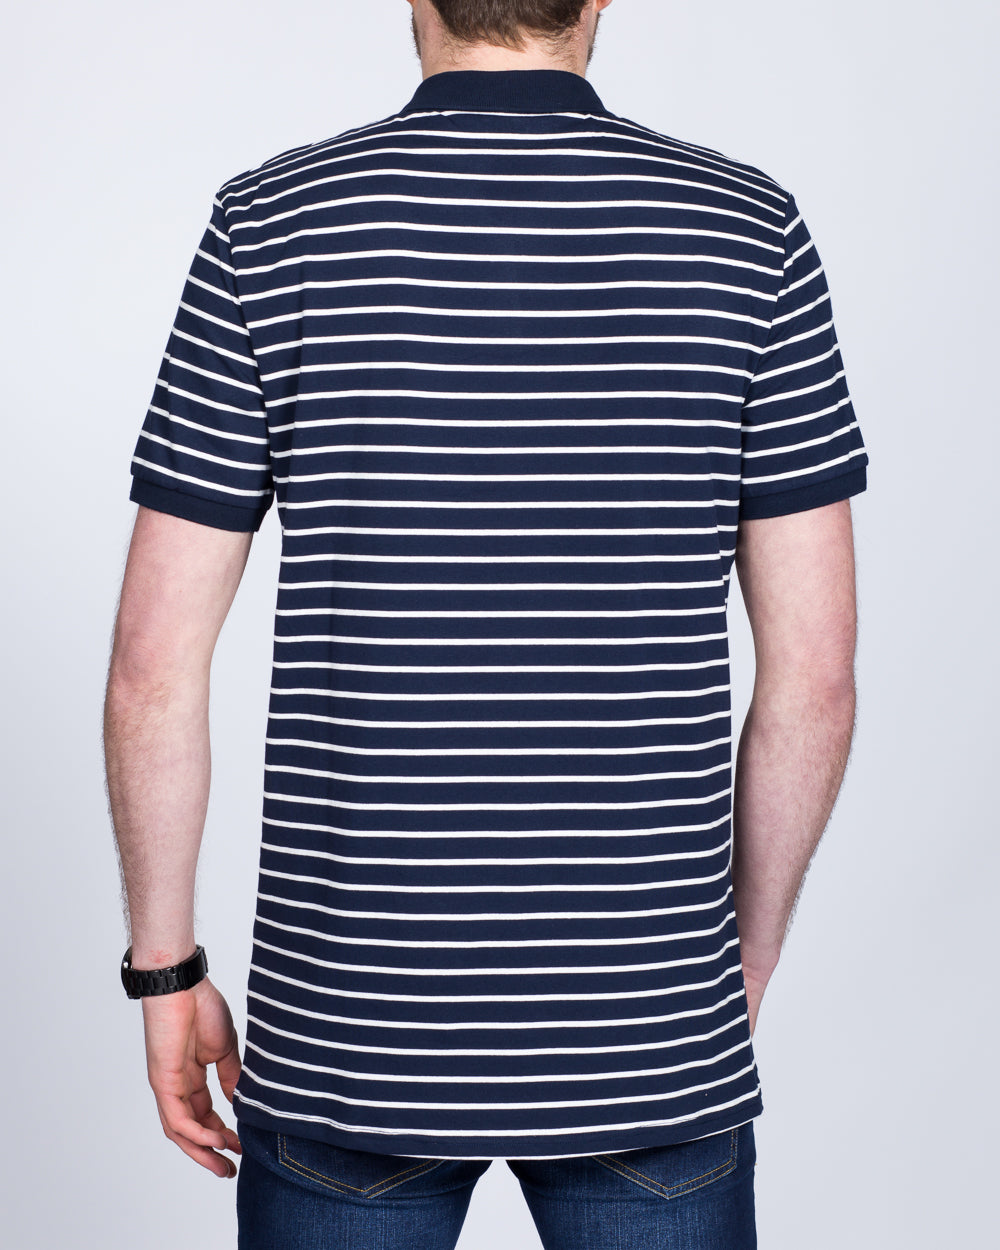 2t Slim Fit Tall Striped Polo Shirt (navy)